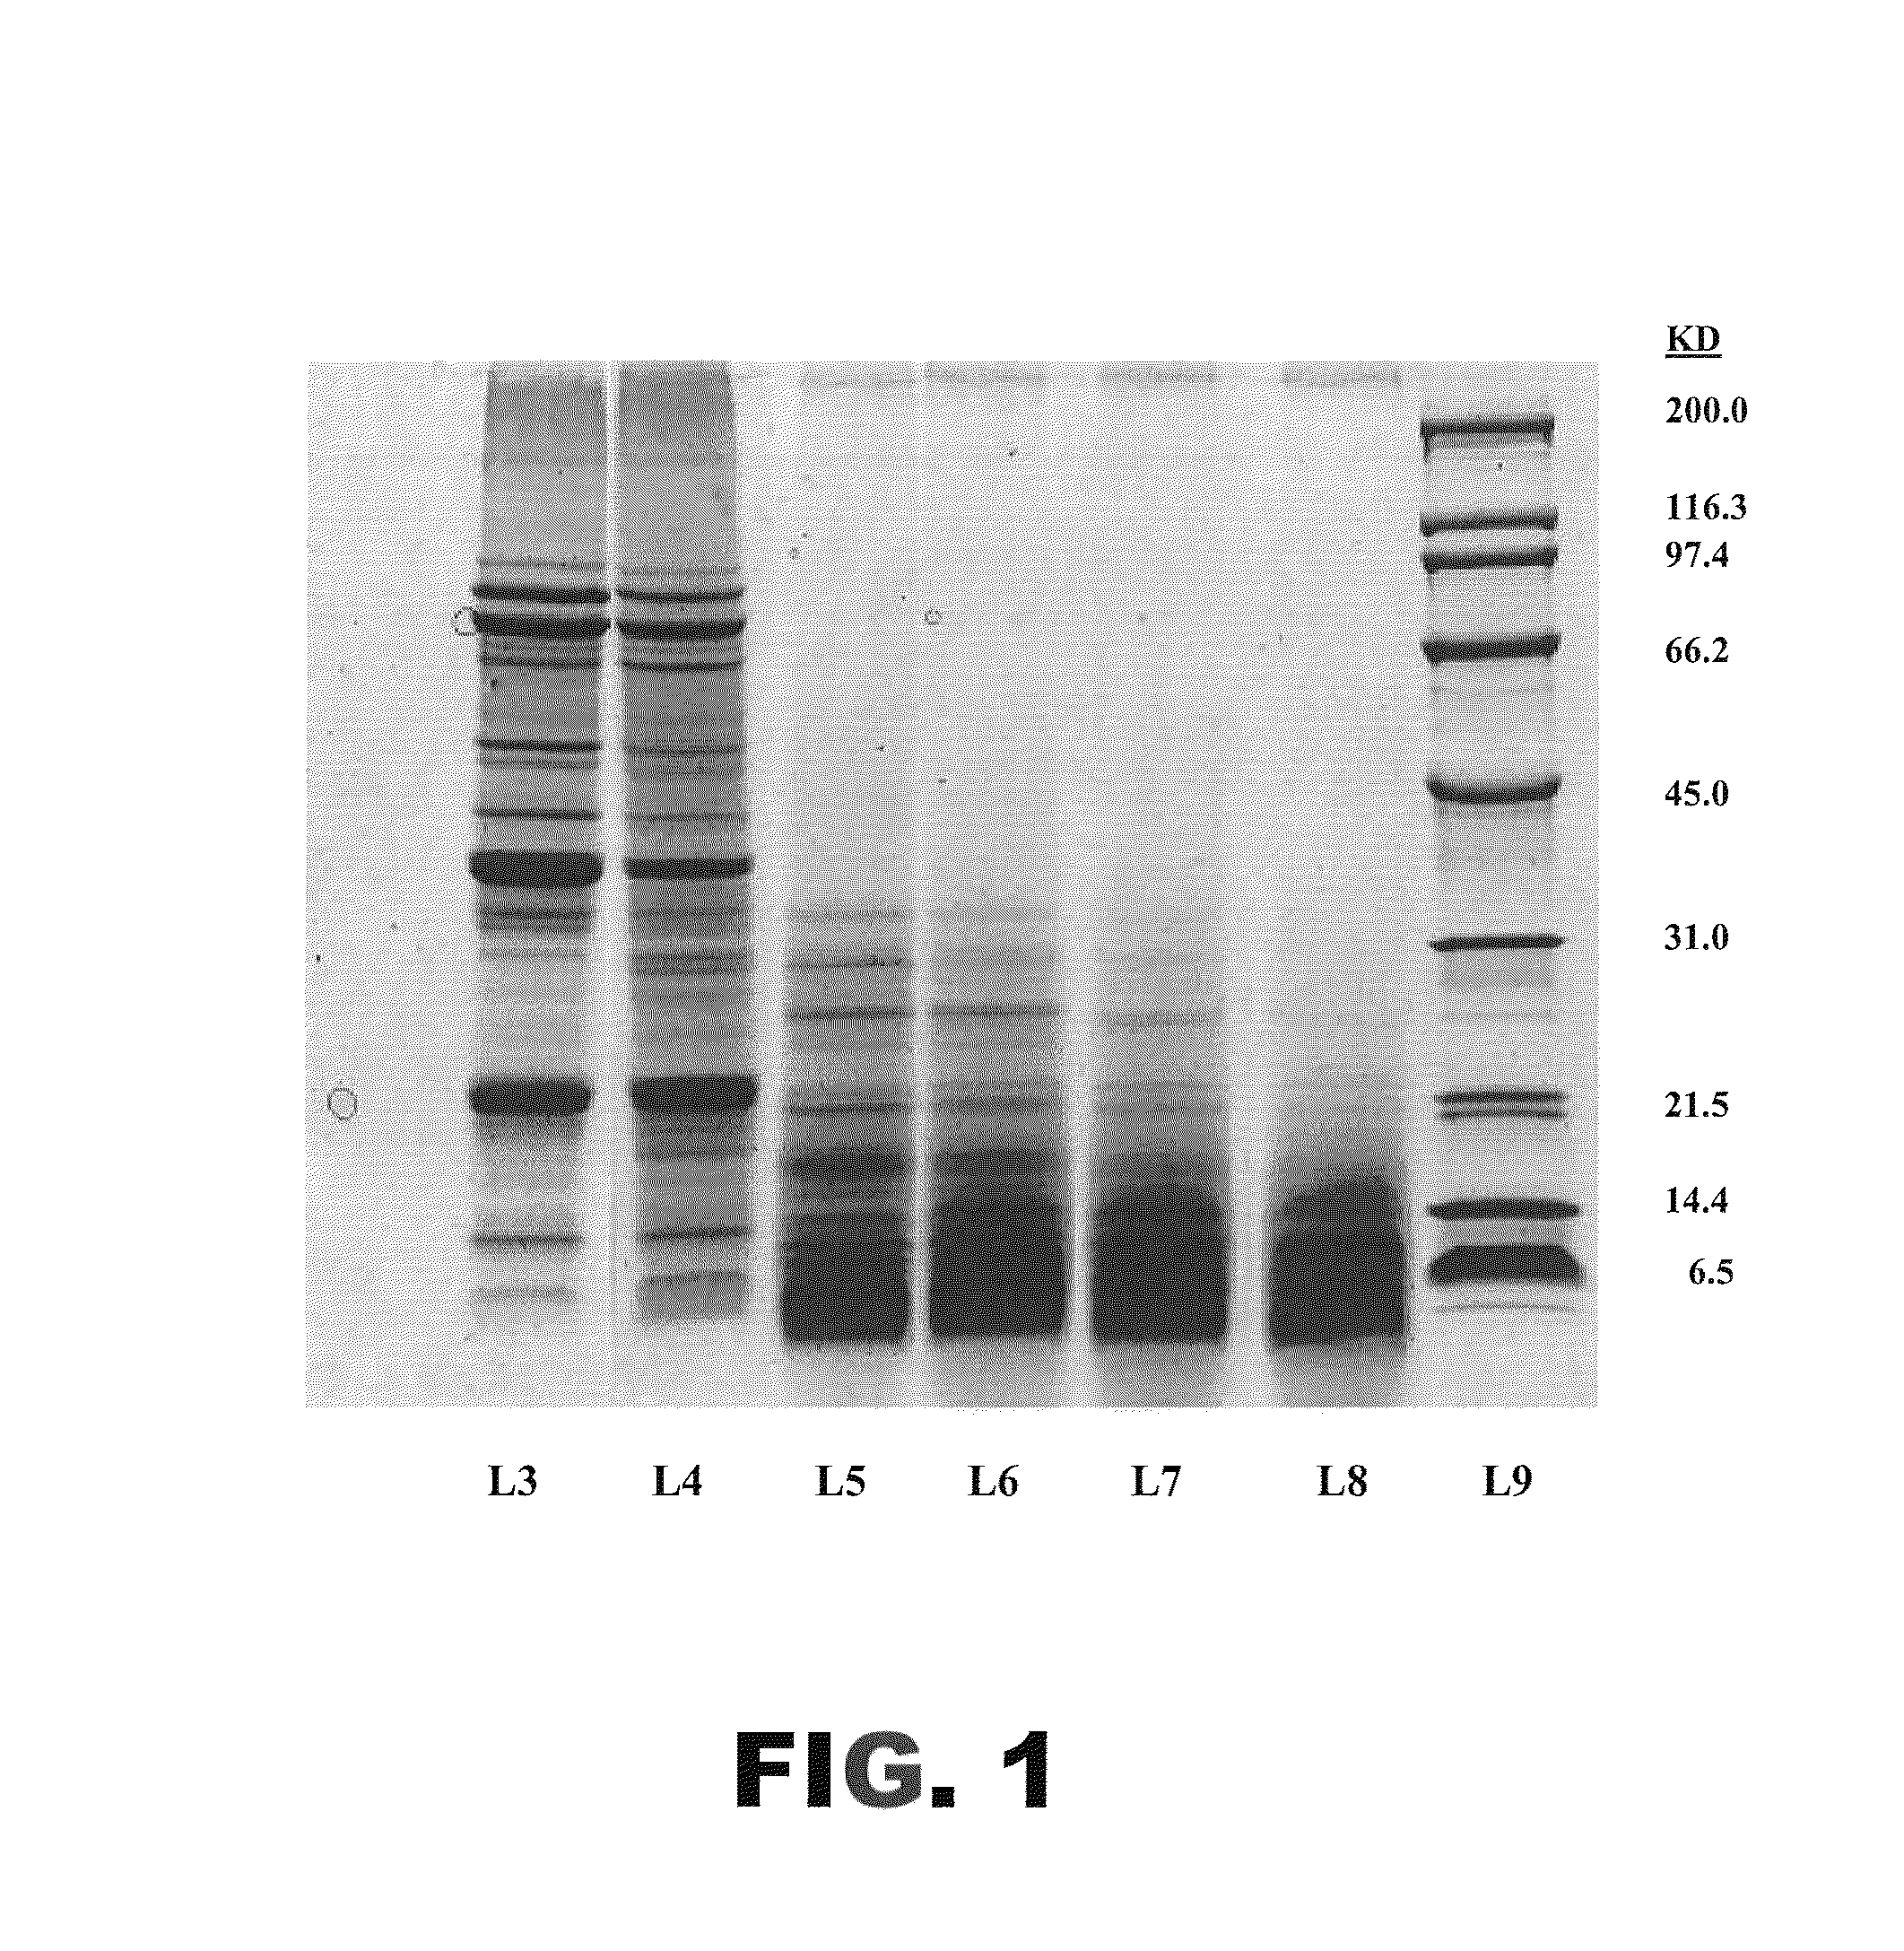 Protein hydrolysate compositions having improved sensory characteristics and physical properties